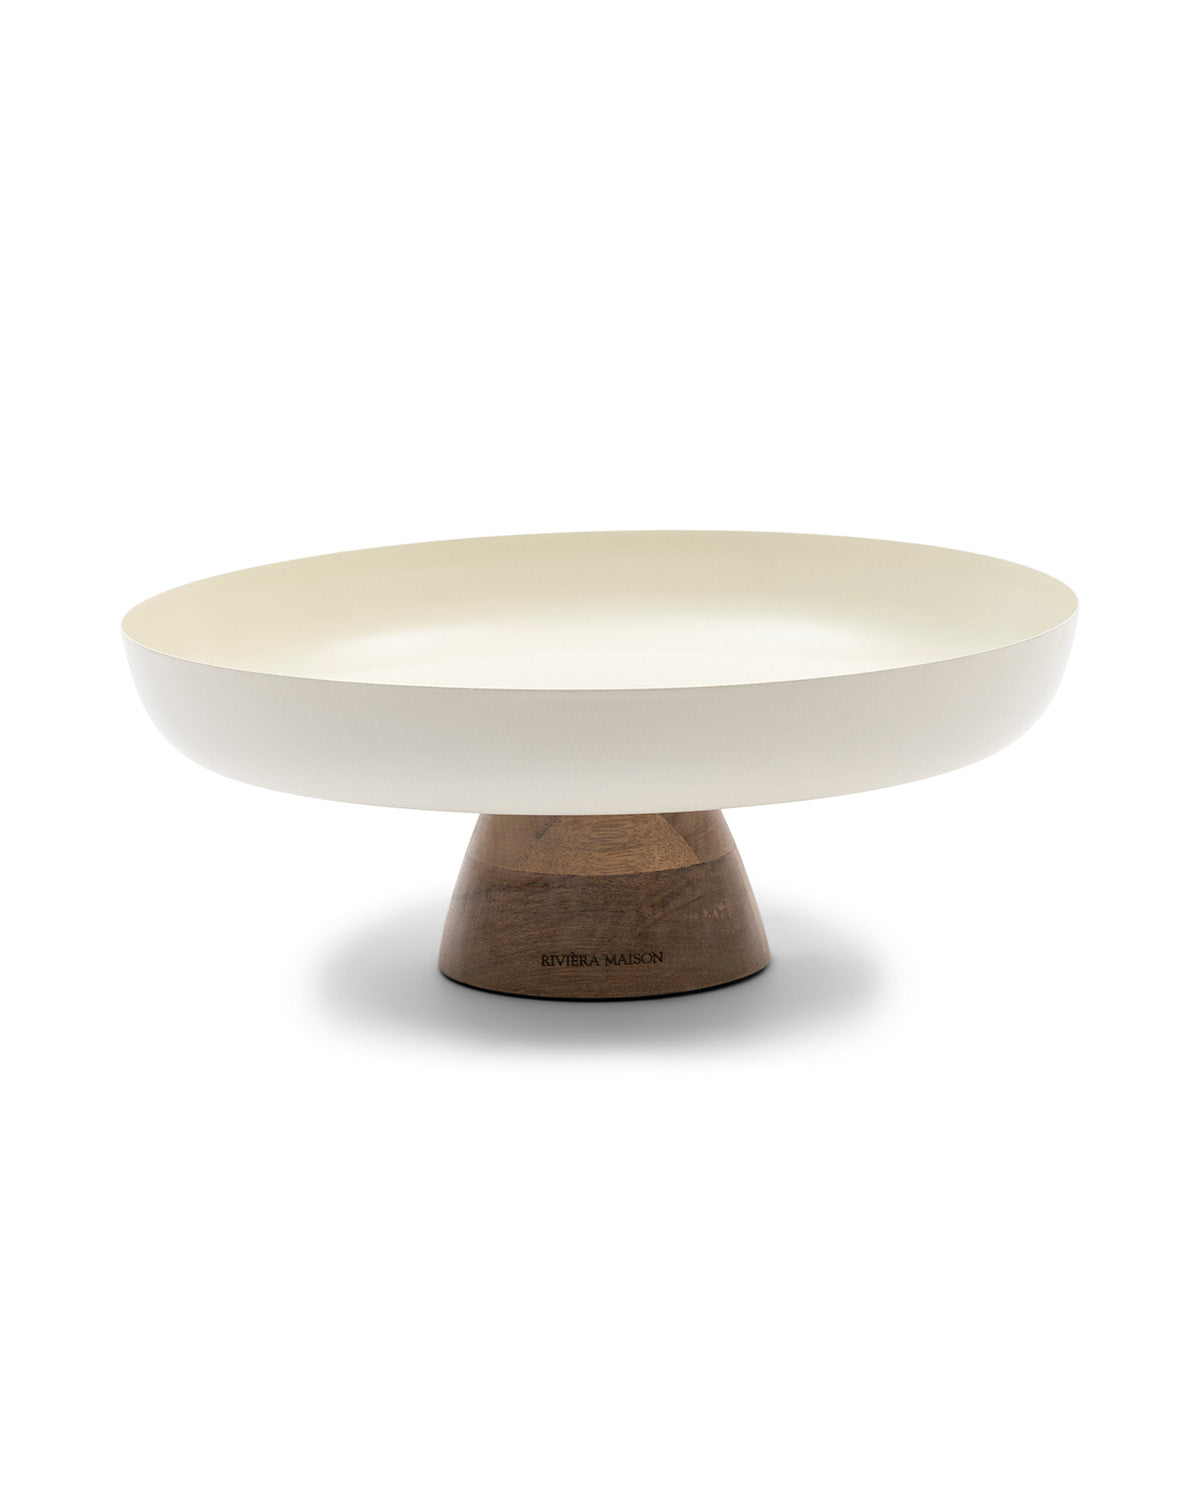 Cake Plate Narvik combination of white metal and mango wood by Riviera Maison